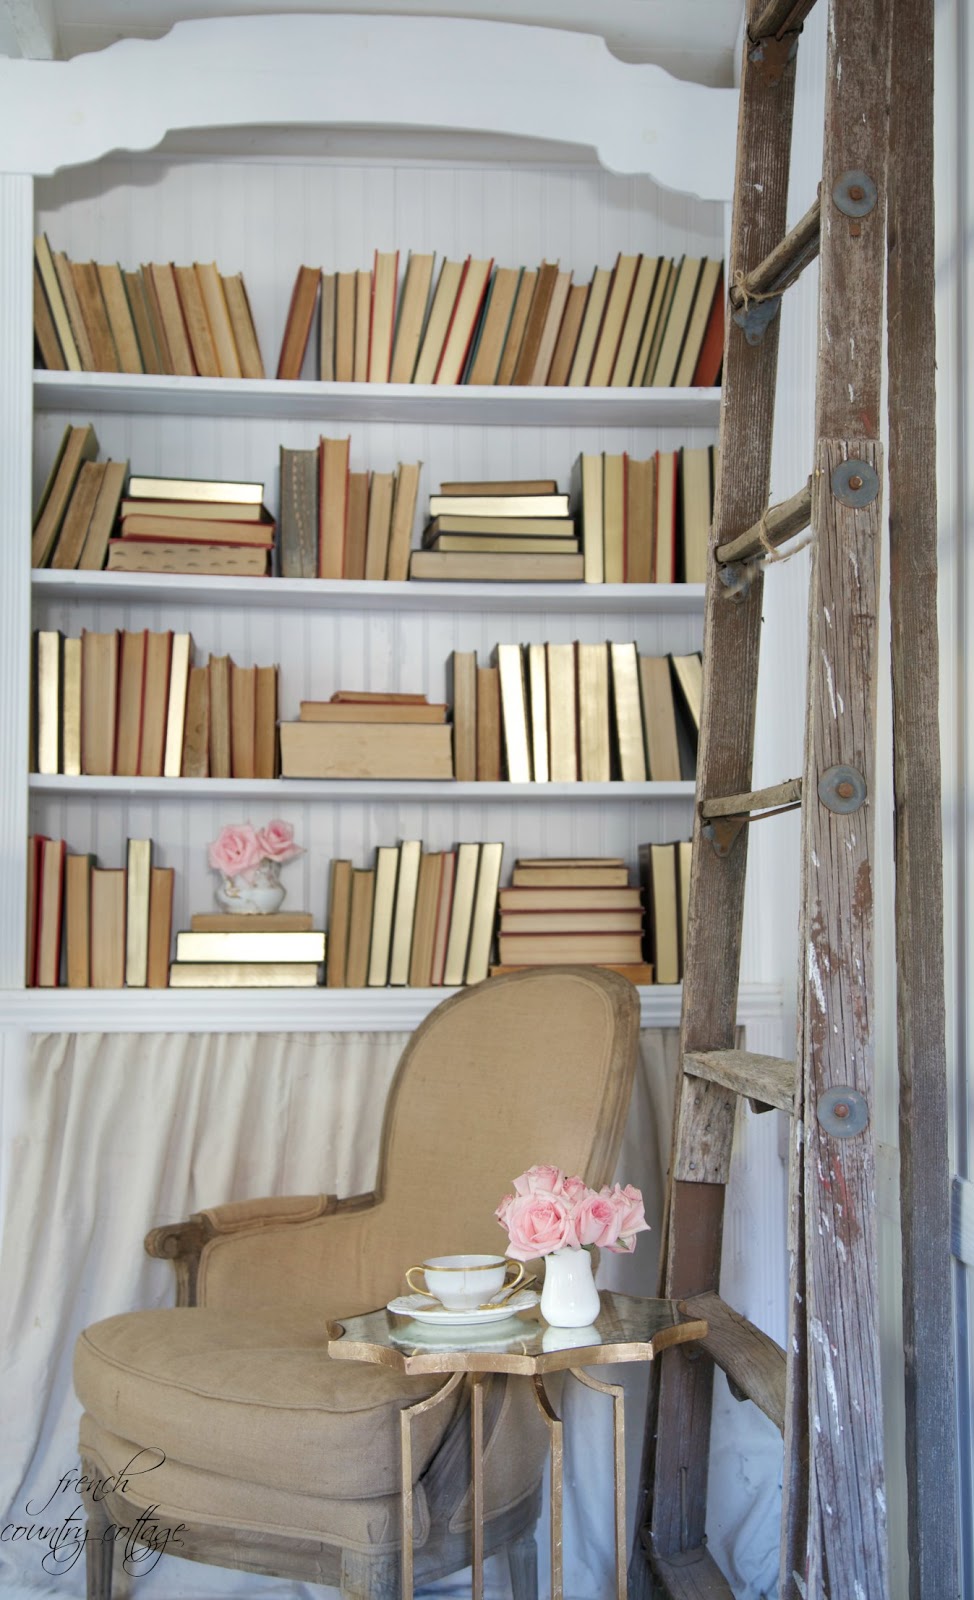 How To Style Shelves French Country, White Country Shelves